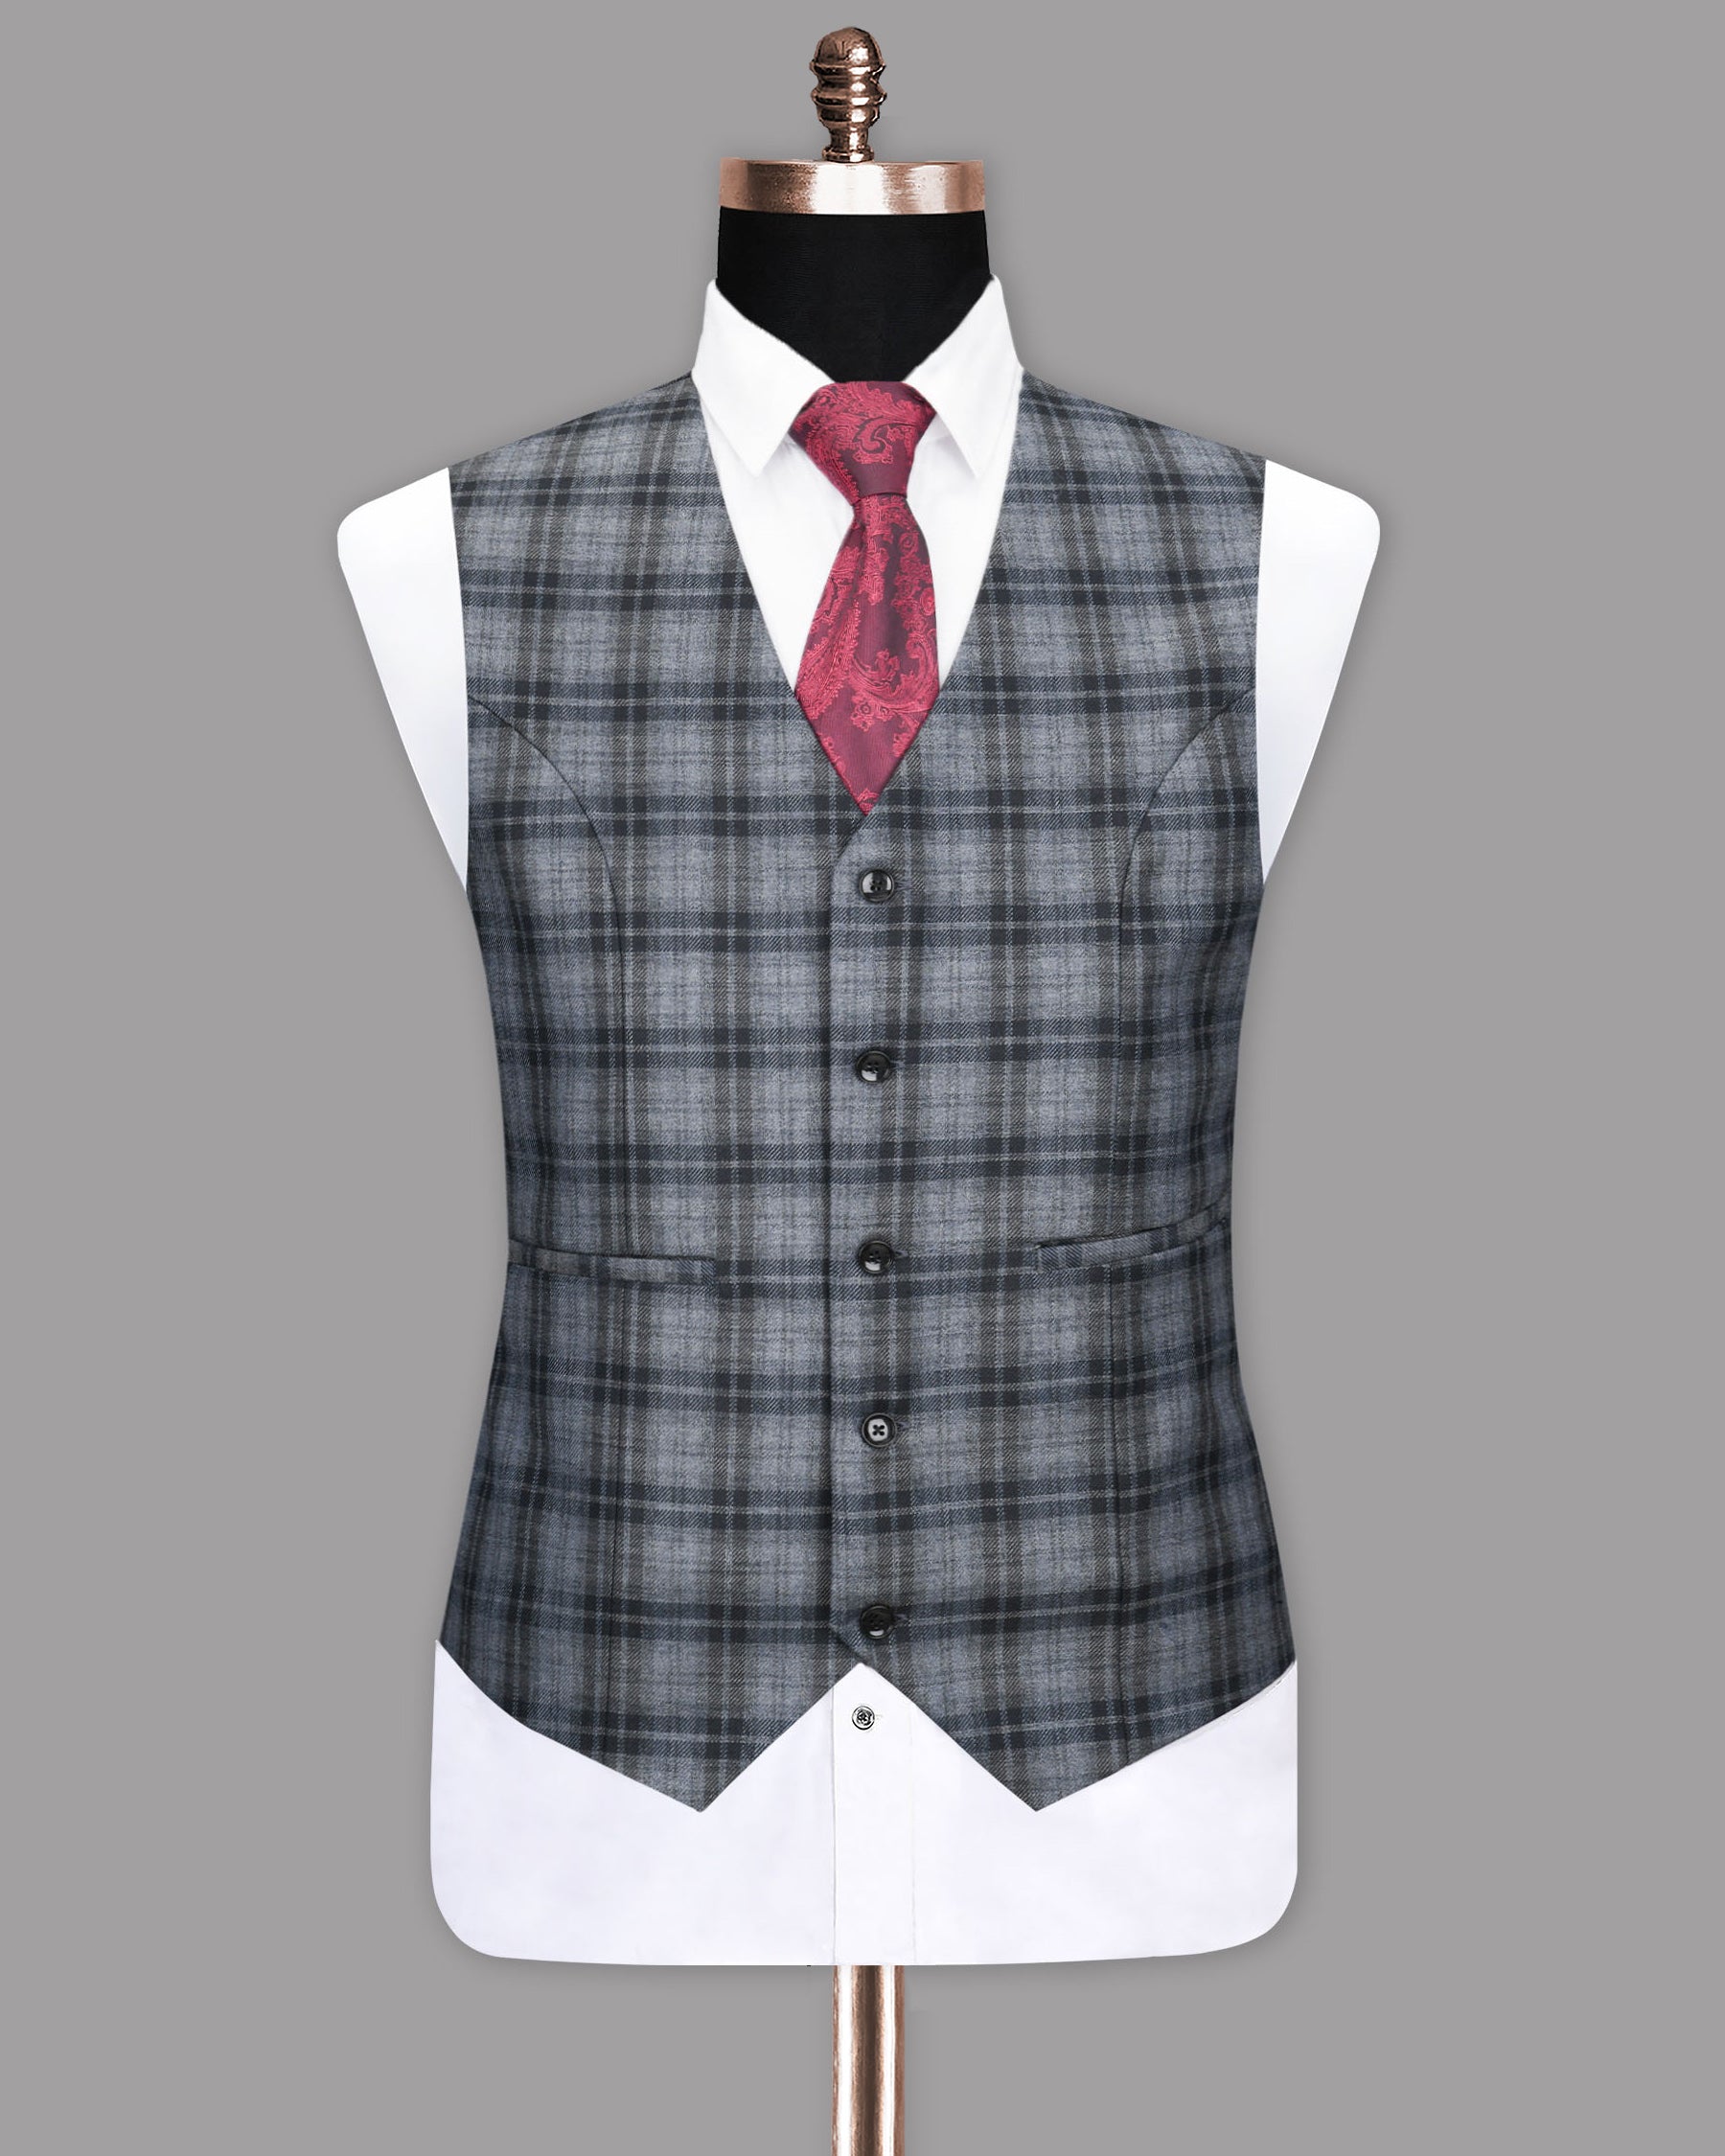 Rolling Stone Grey with Log Cabin Wool Rich Windowpane Waistcoat V1124-36, V1124-38, V1124-40, V1124-44, V1124-48, V1124-52, V1124-56, V1124-42, V1124-54, V1124-58, V1124-46, V1124-50, V1124-60